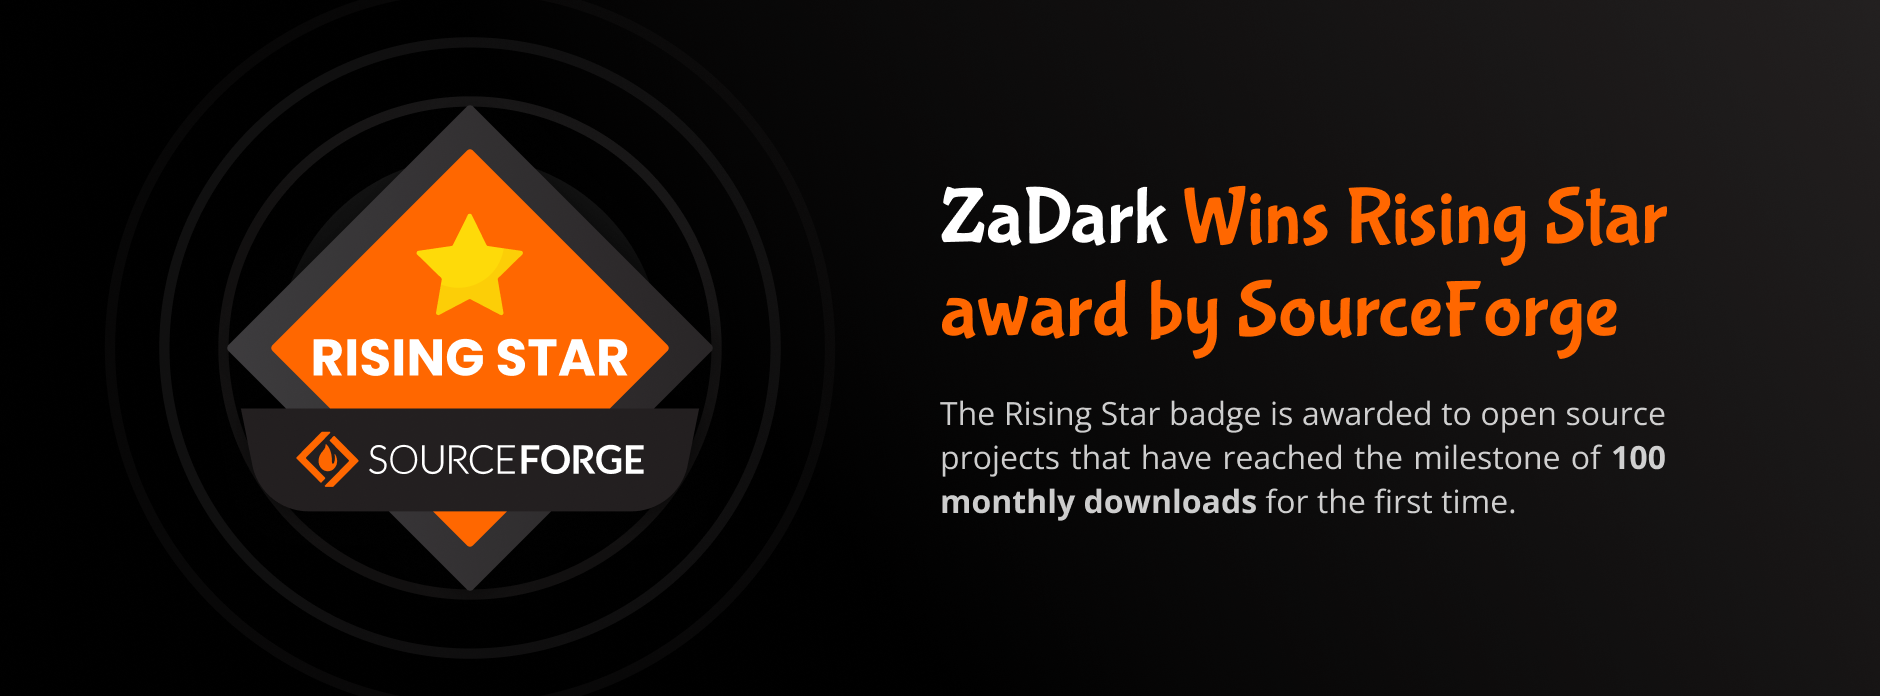 Rising Star award by SourceForge